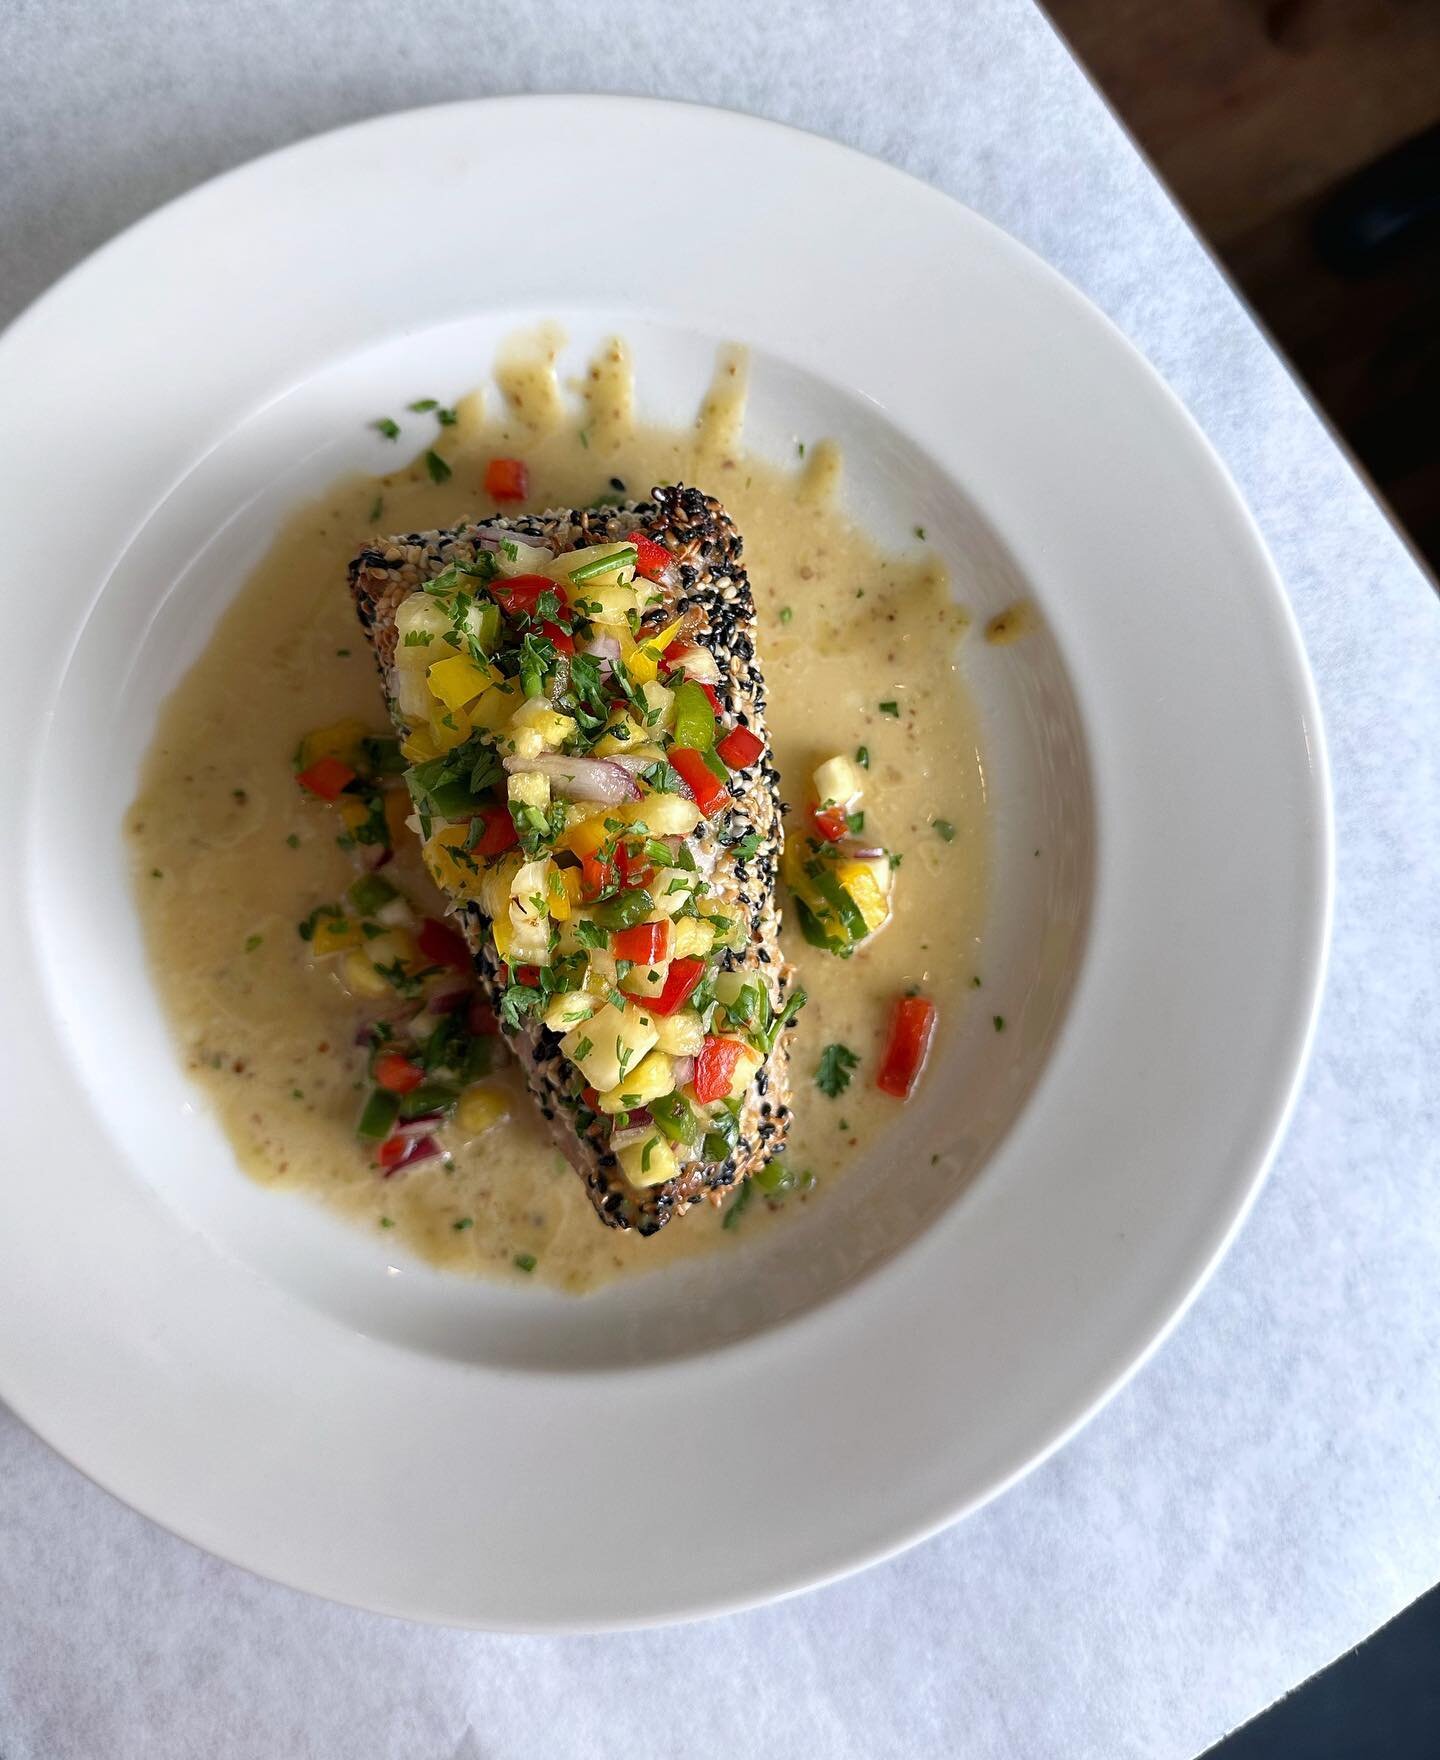 This beautiful dish featured tonight is our sesame crusted Yellowfin Tuna with wasabi sauce and pineapple salsa! Cheers!